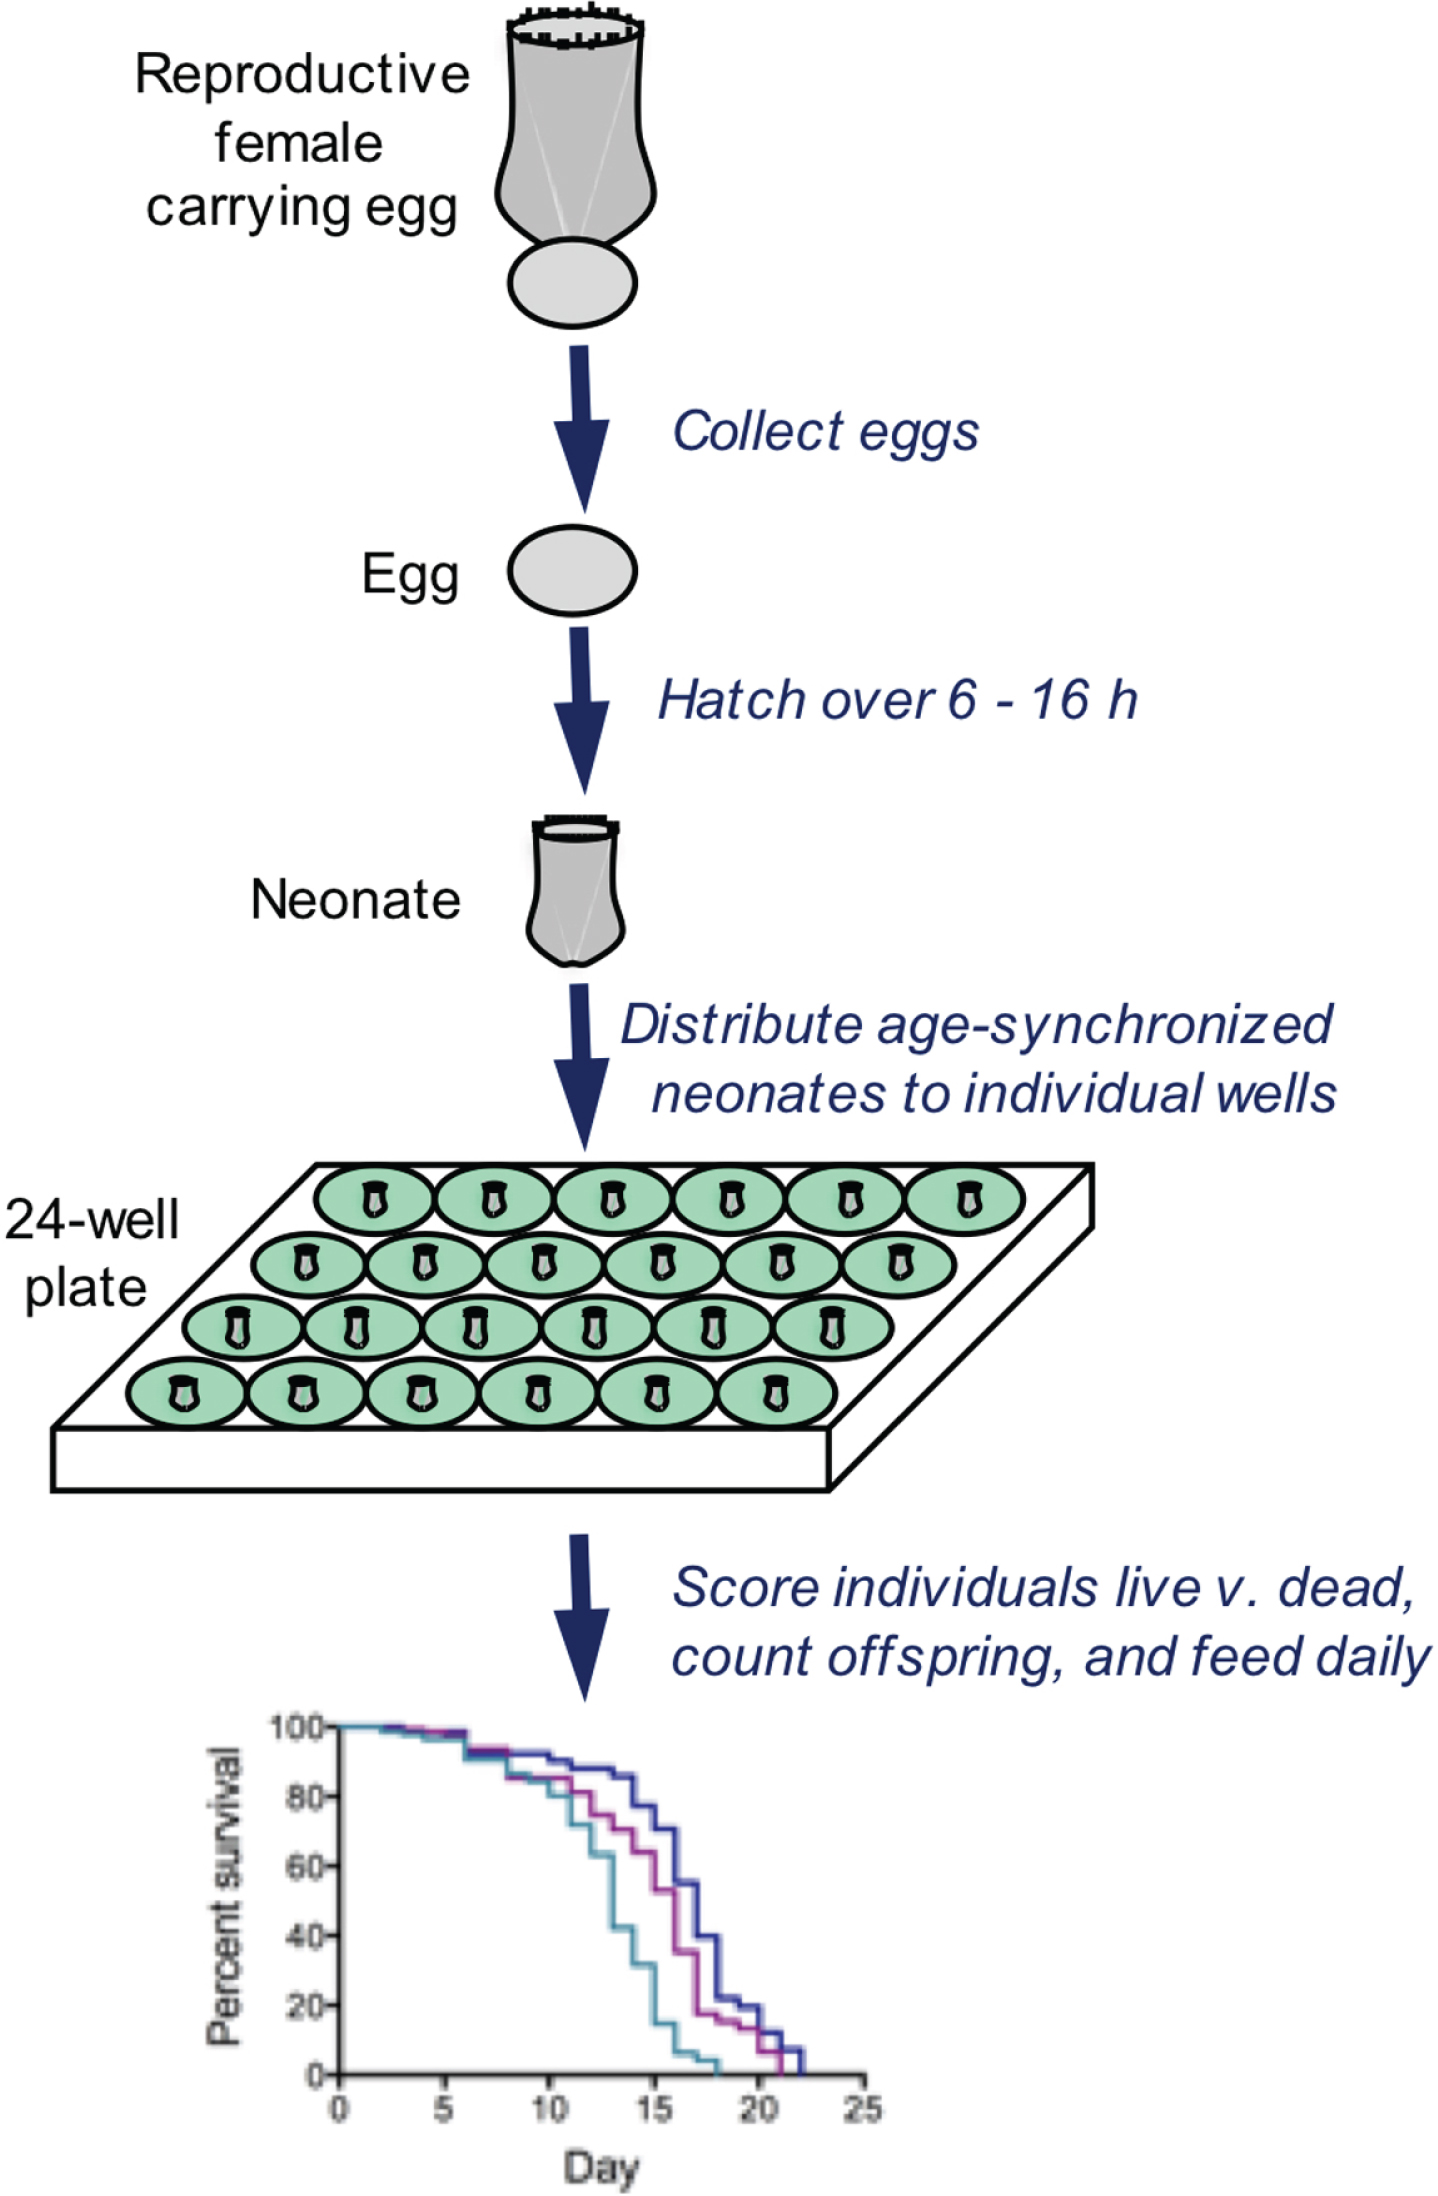 Typical methods for analyzing survivorship and fecundity of Brachionus. Eggs are collected and hatched over a short time window, resulting in an age-synchronized cohort. Neonates are distributed to wells containing 1 ml of seawater, algae as food, and drugs or other treatment. Every 24 h, all individuals are observed by dissecting microscope; each rotifer is fed, scored as live or dead, assessed for reproductive status, and the number of offspring is counted. These methods allows individual-level measurements of lifespan and reproduction with high replication.